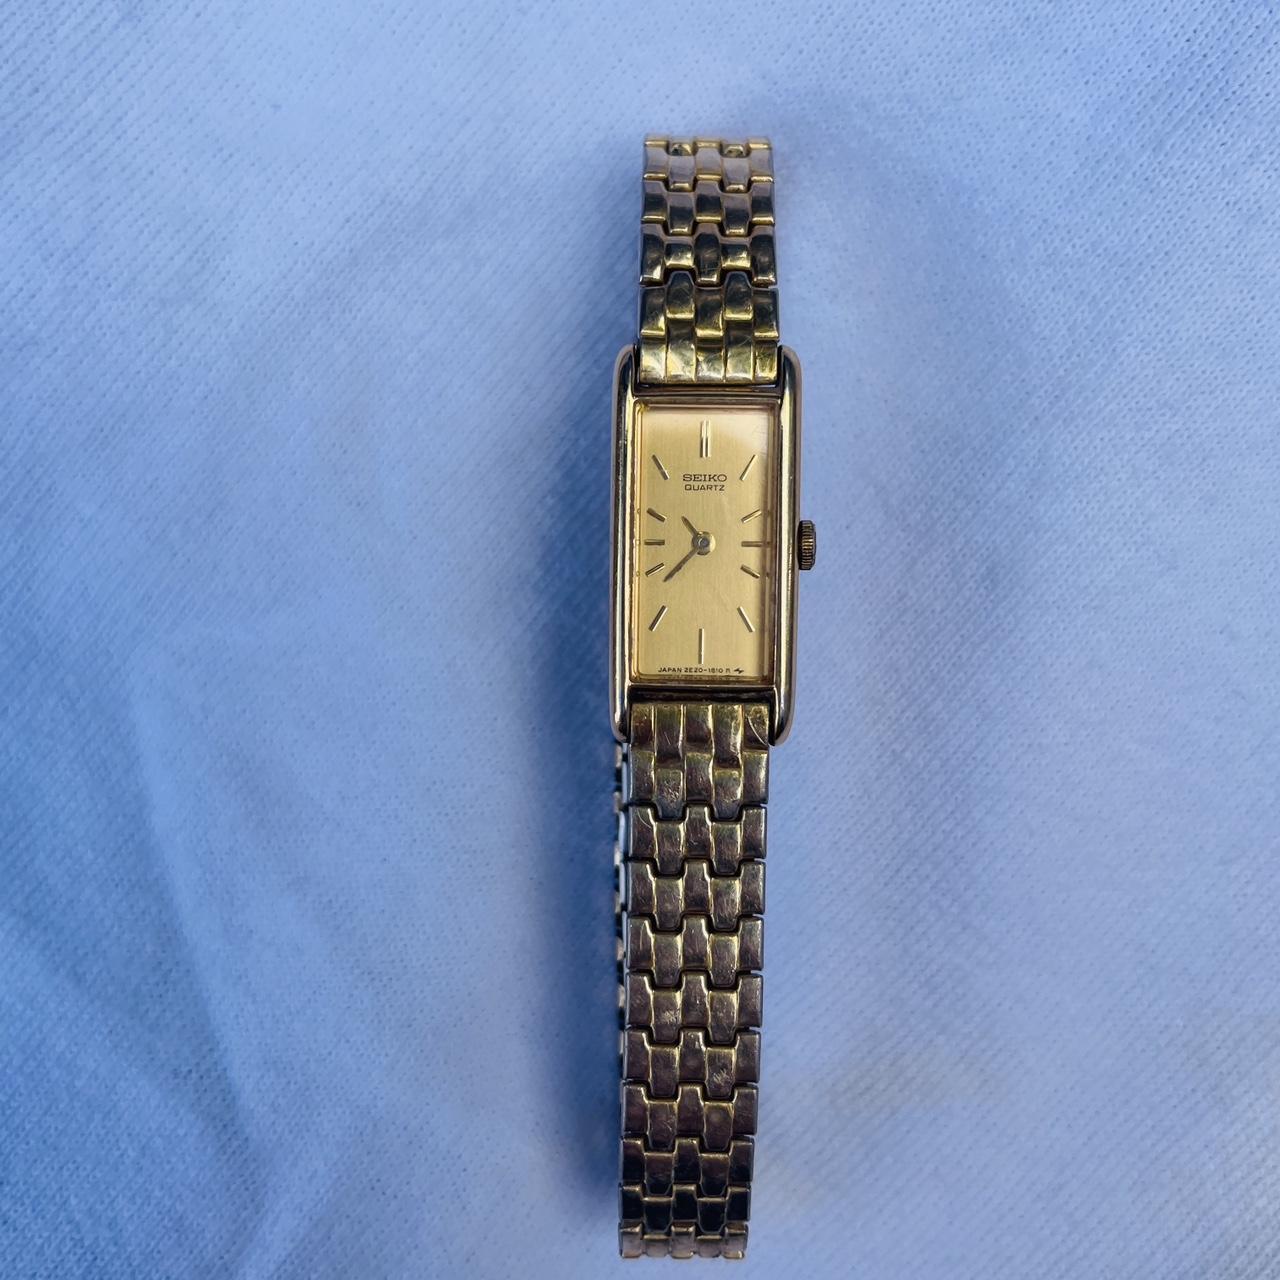 Seiko gold toned woman’s watch, very dainty and... - Depop